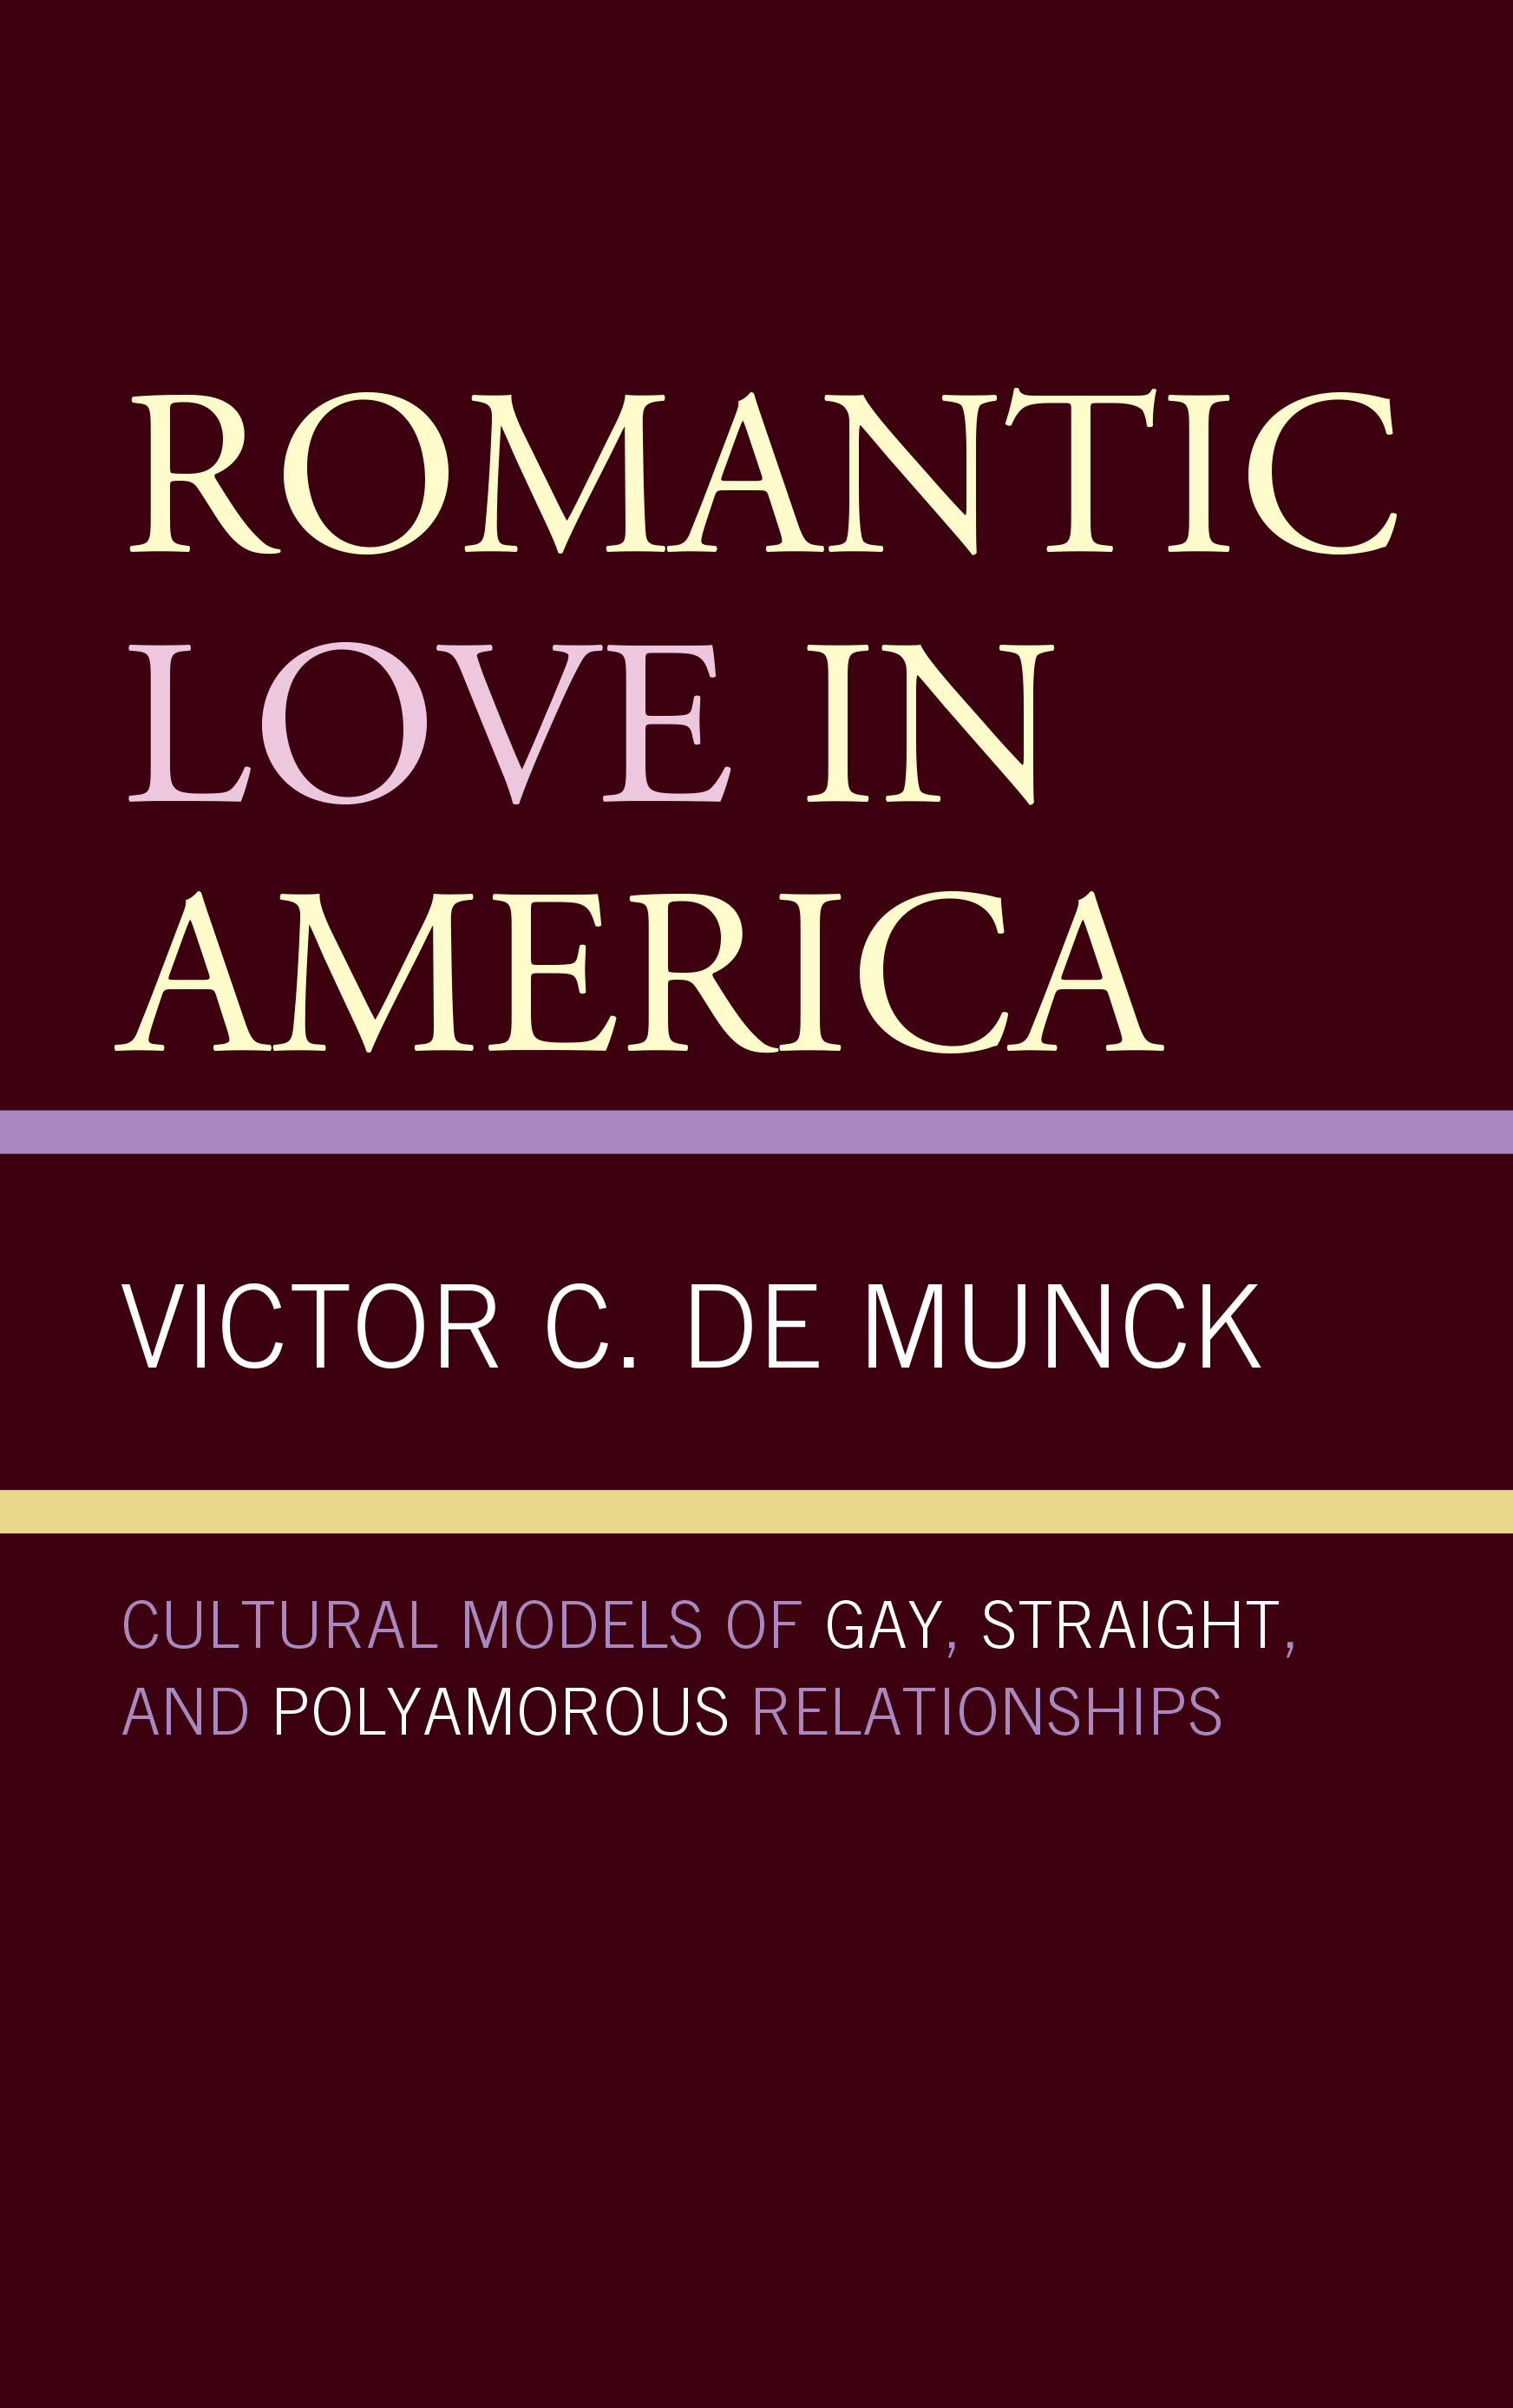 Romantic Love in America: Cultural Models of Gay, Straight, and Polyamorous Relationships